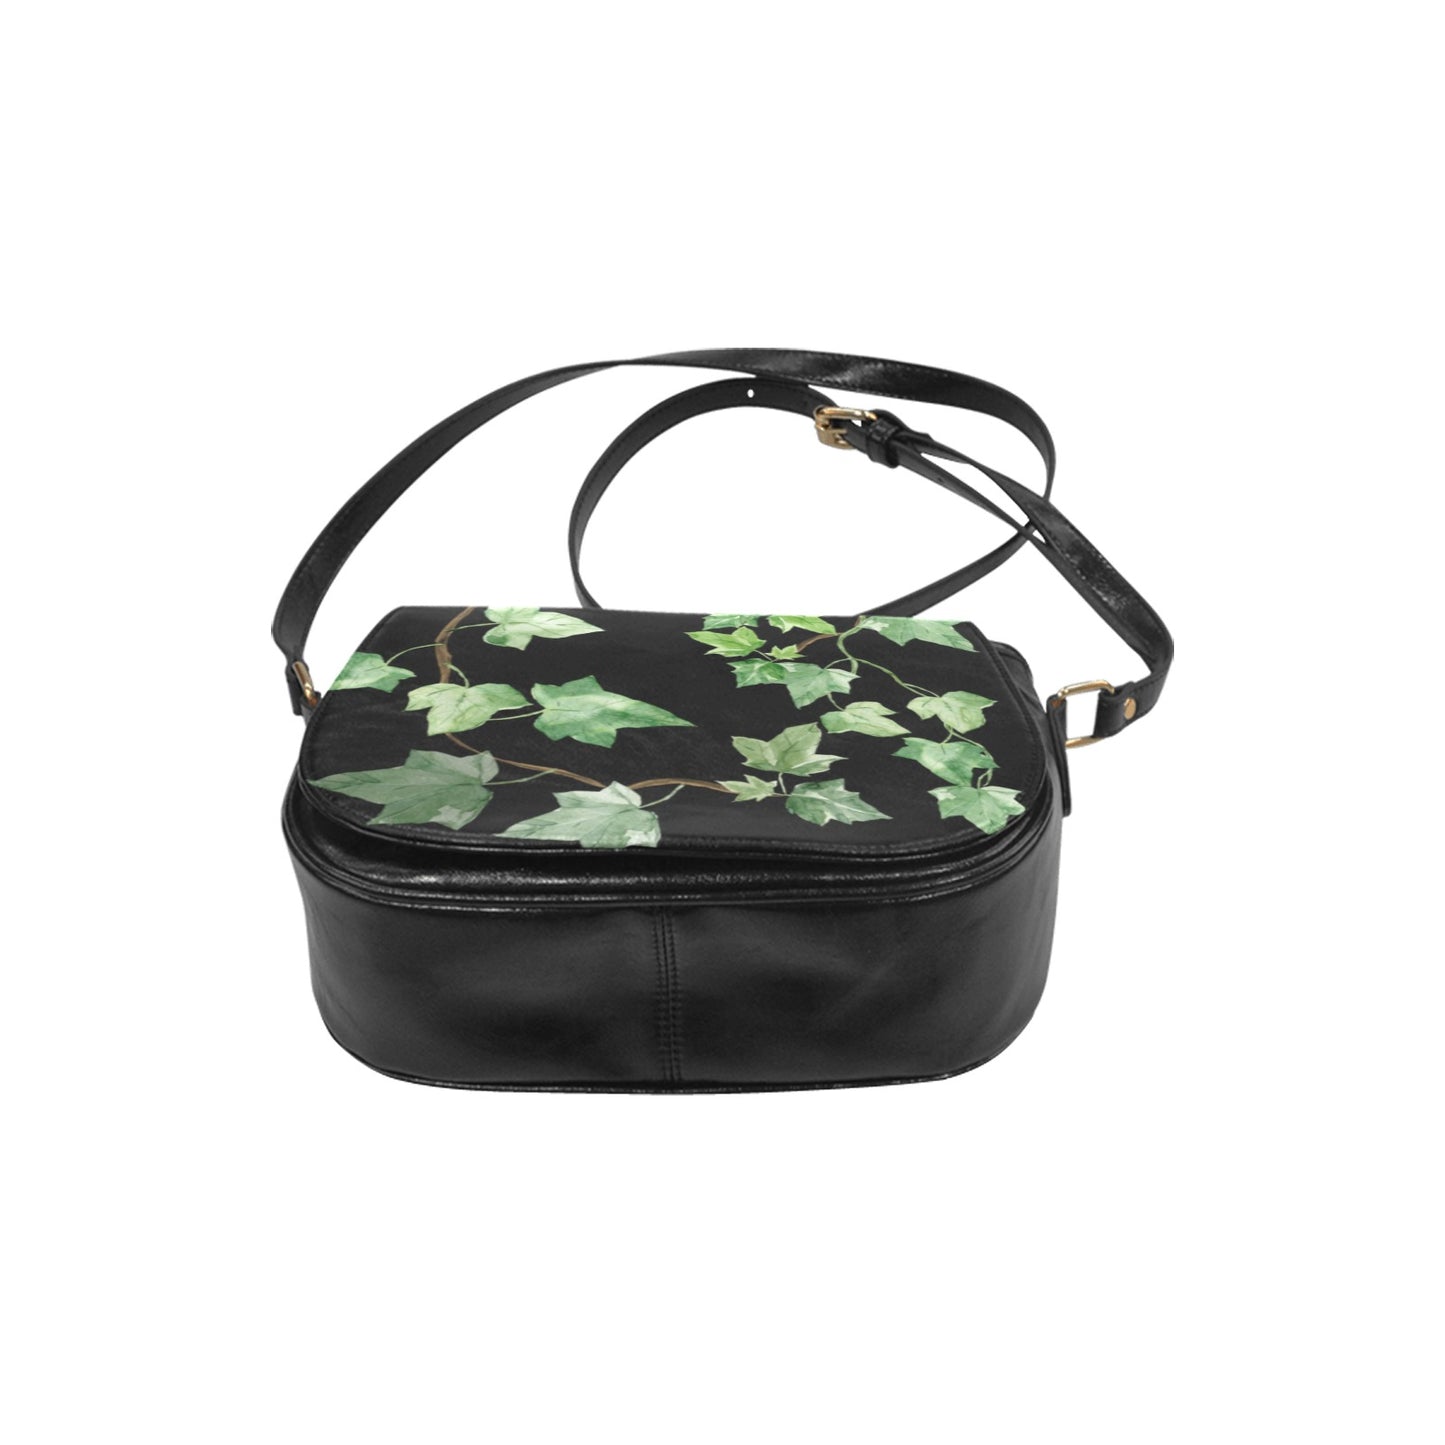 Black and Green Ivy Phases Cross Body Purse